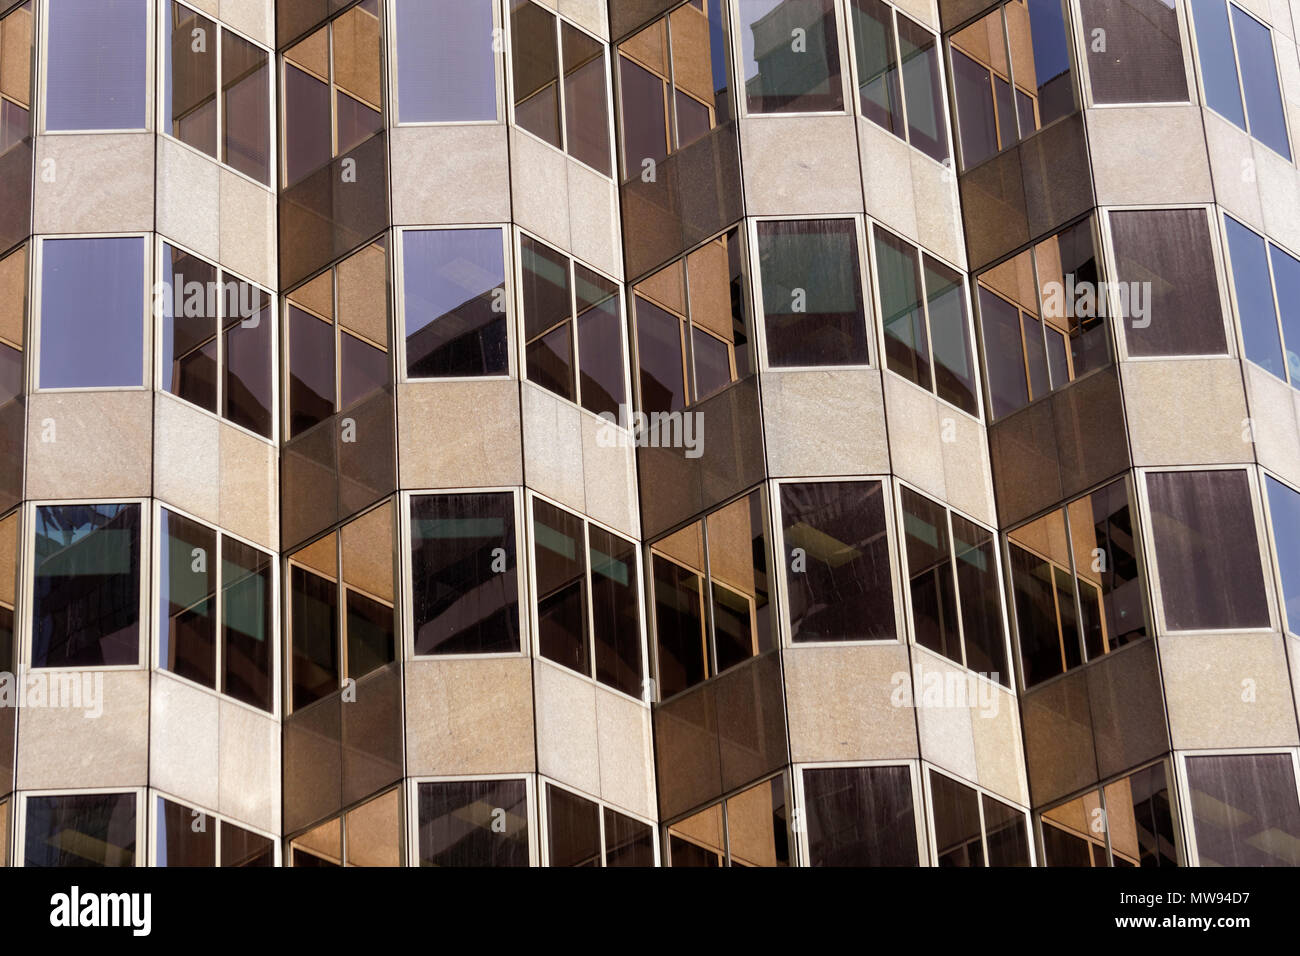 Rectangular windows of a high rise office building forming a repetitive pattern Stock Photo